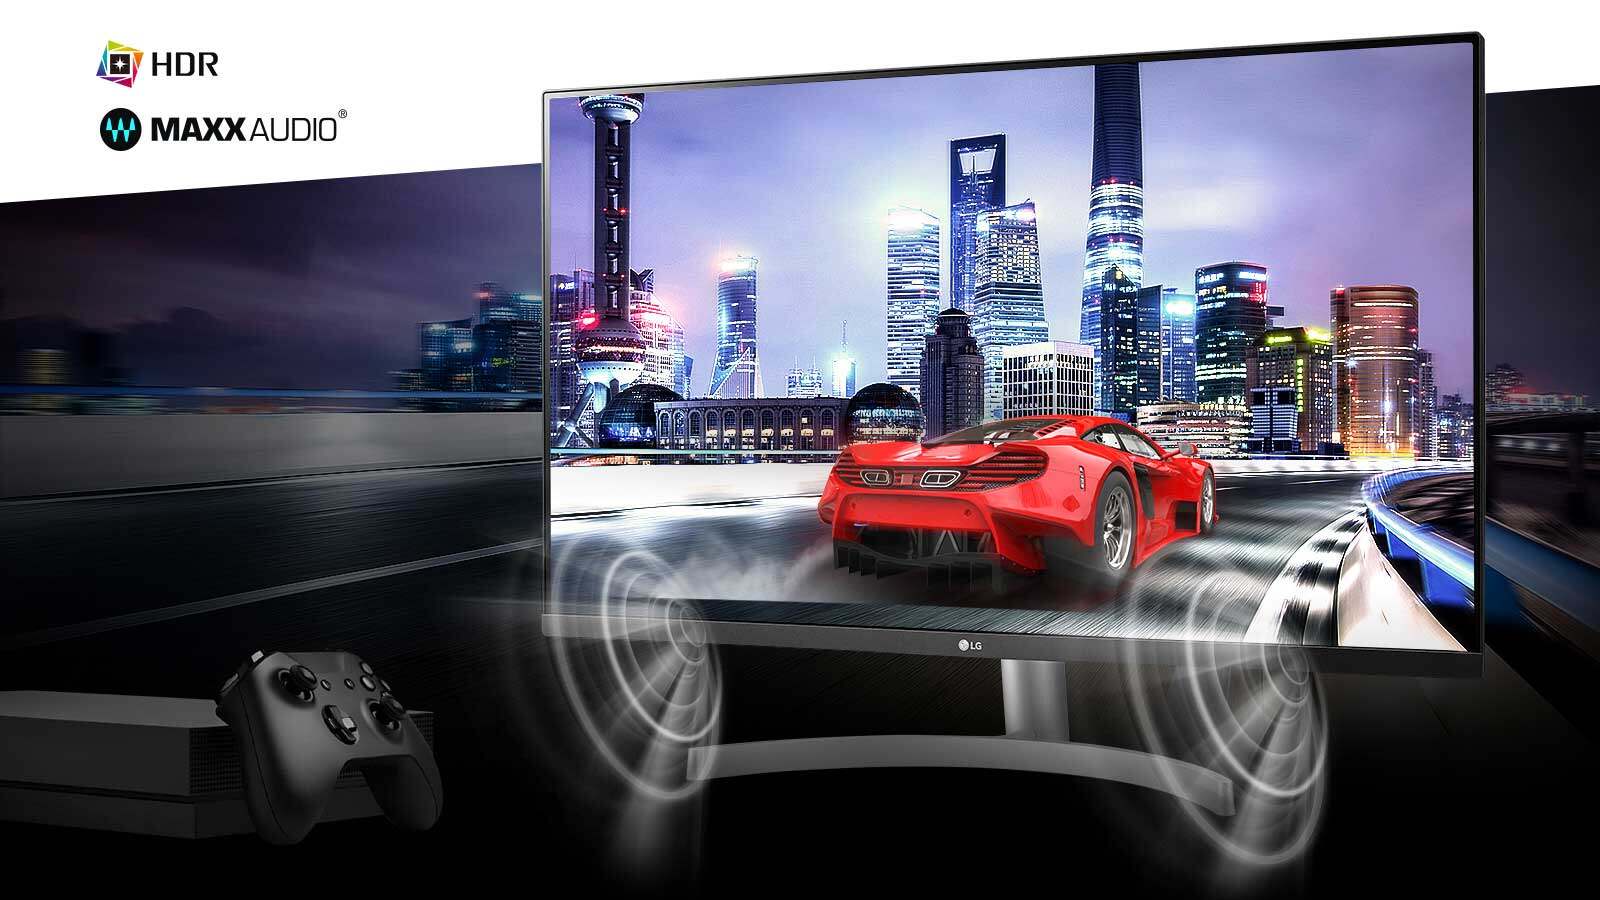 Immersive true 4K HDR console gaming with the car scene with MAXXAUDIO®